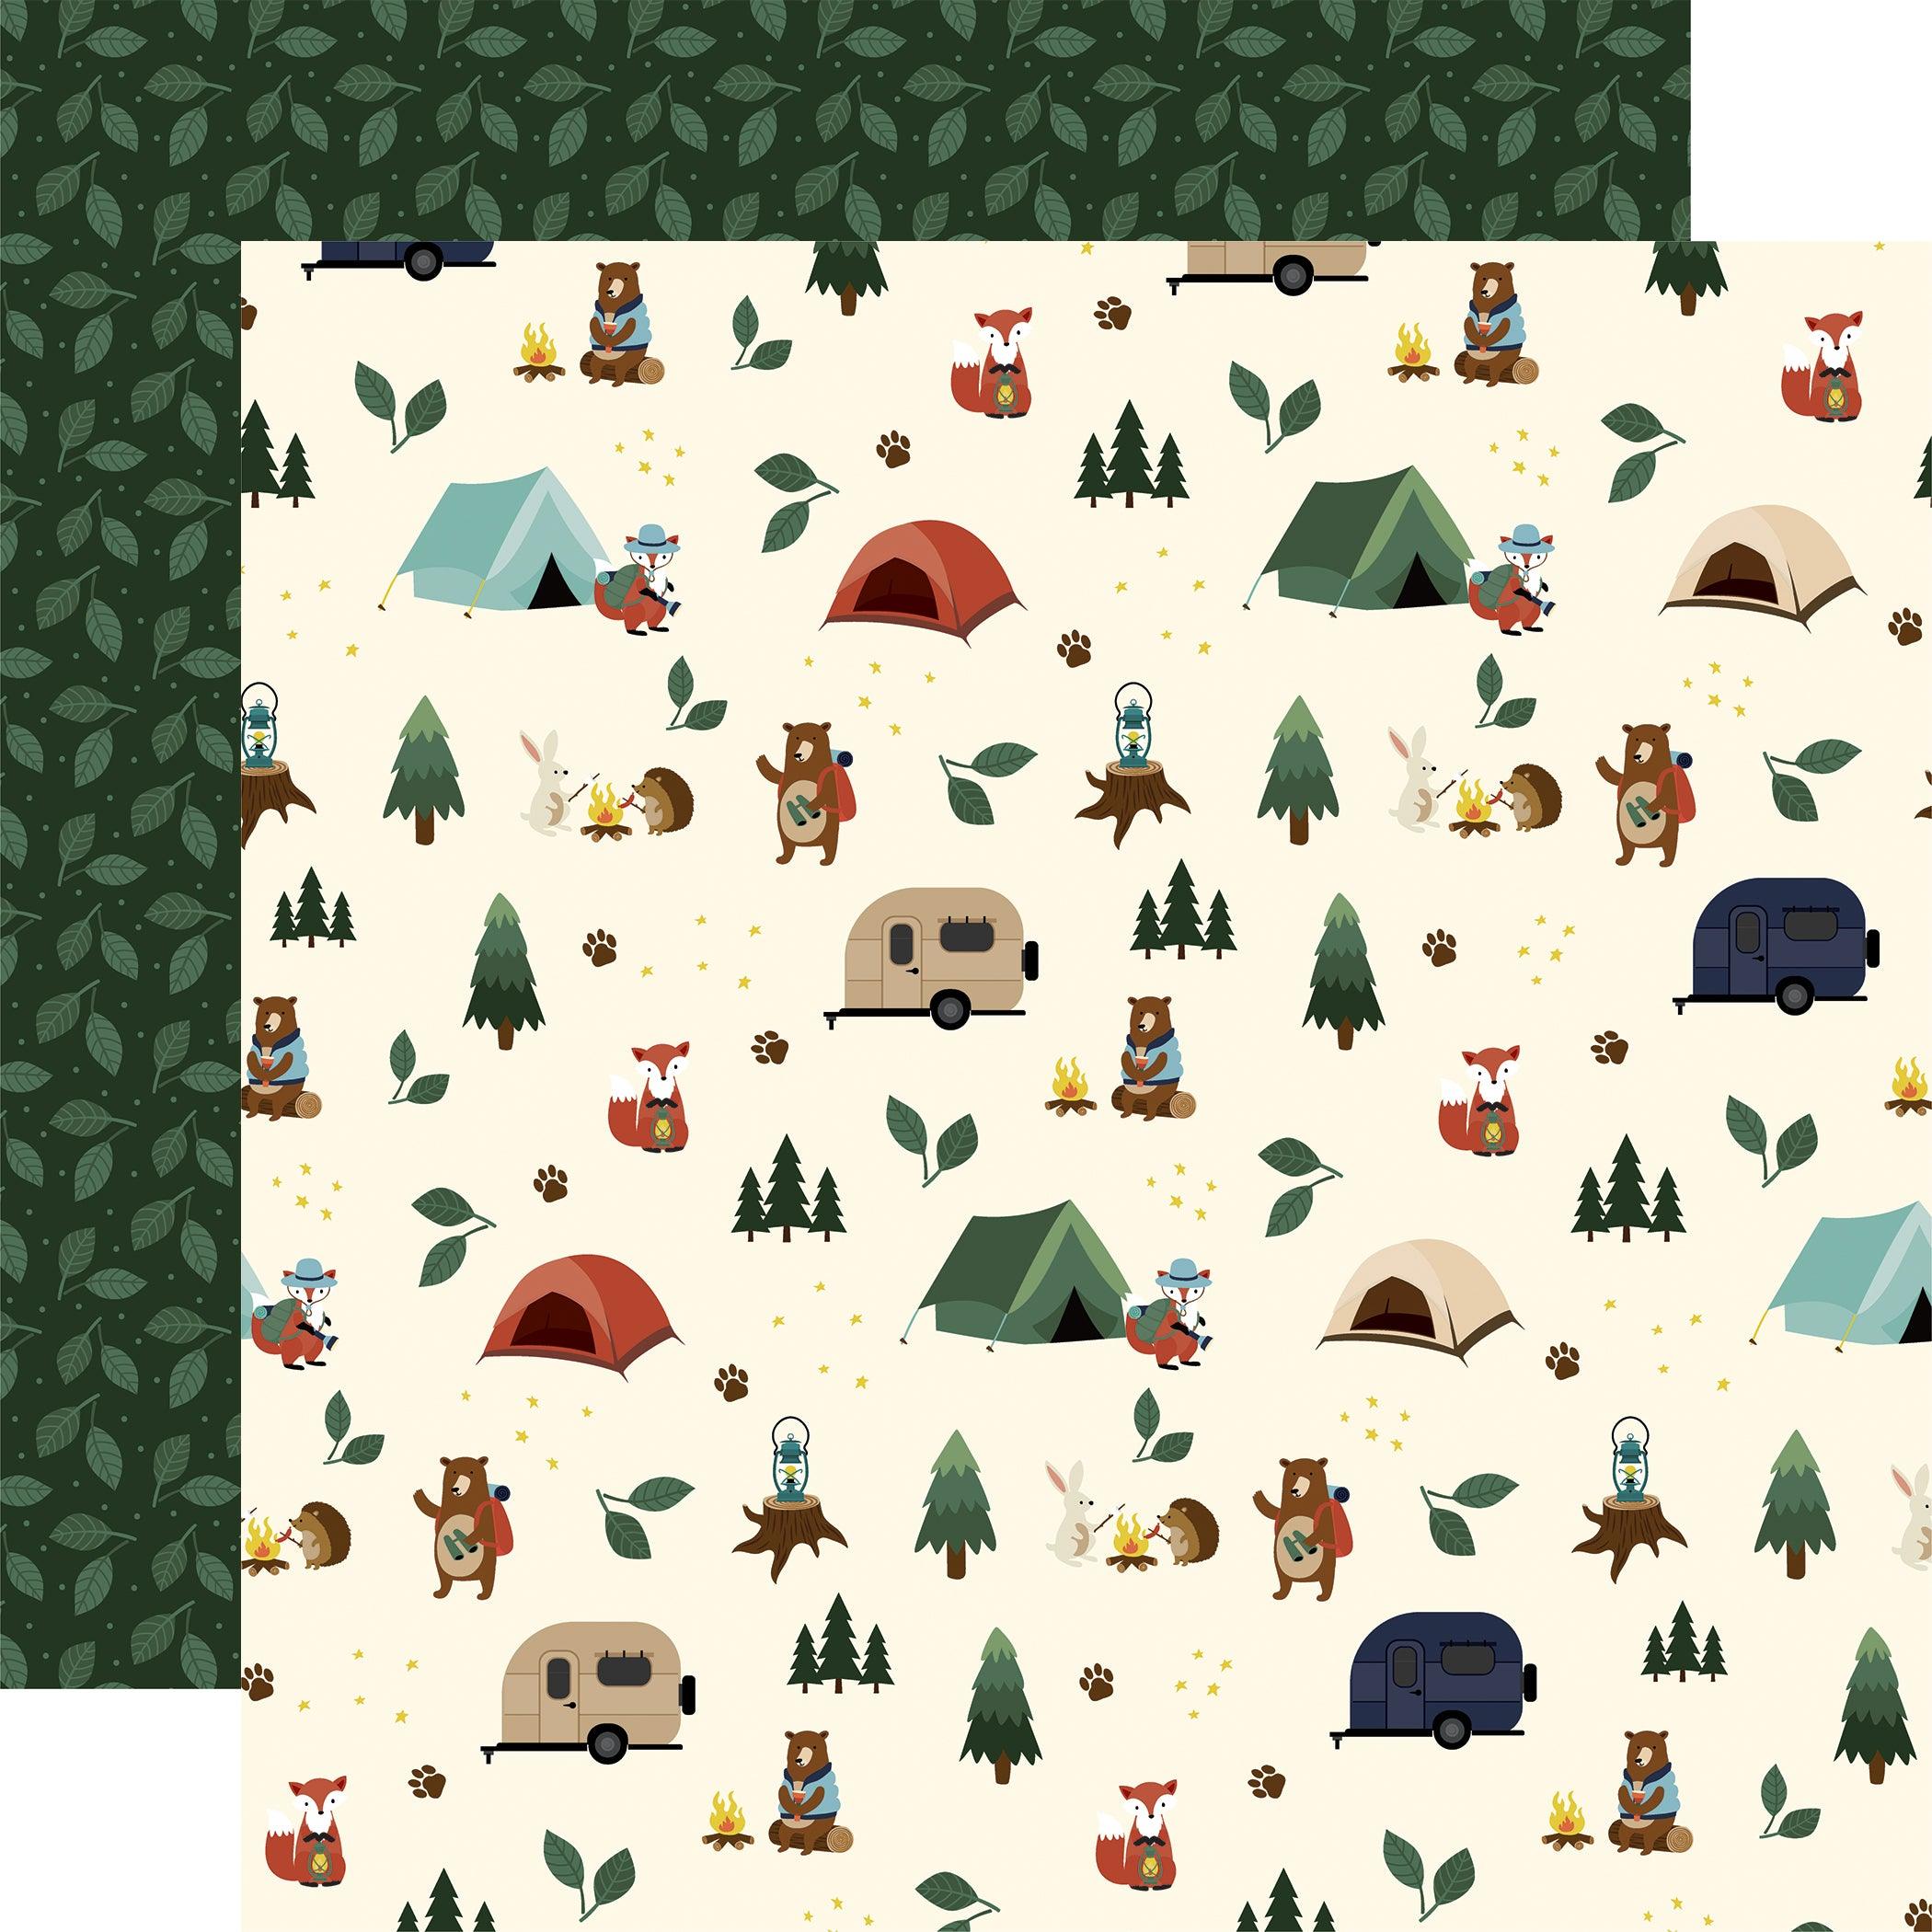 Call Of The Wild Collection 12 x 12 Scrapbook Paper & Sticker Pack by Echo Park Paper - Scrapbook Supply Companies